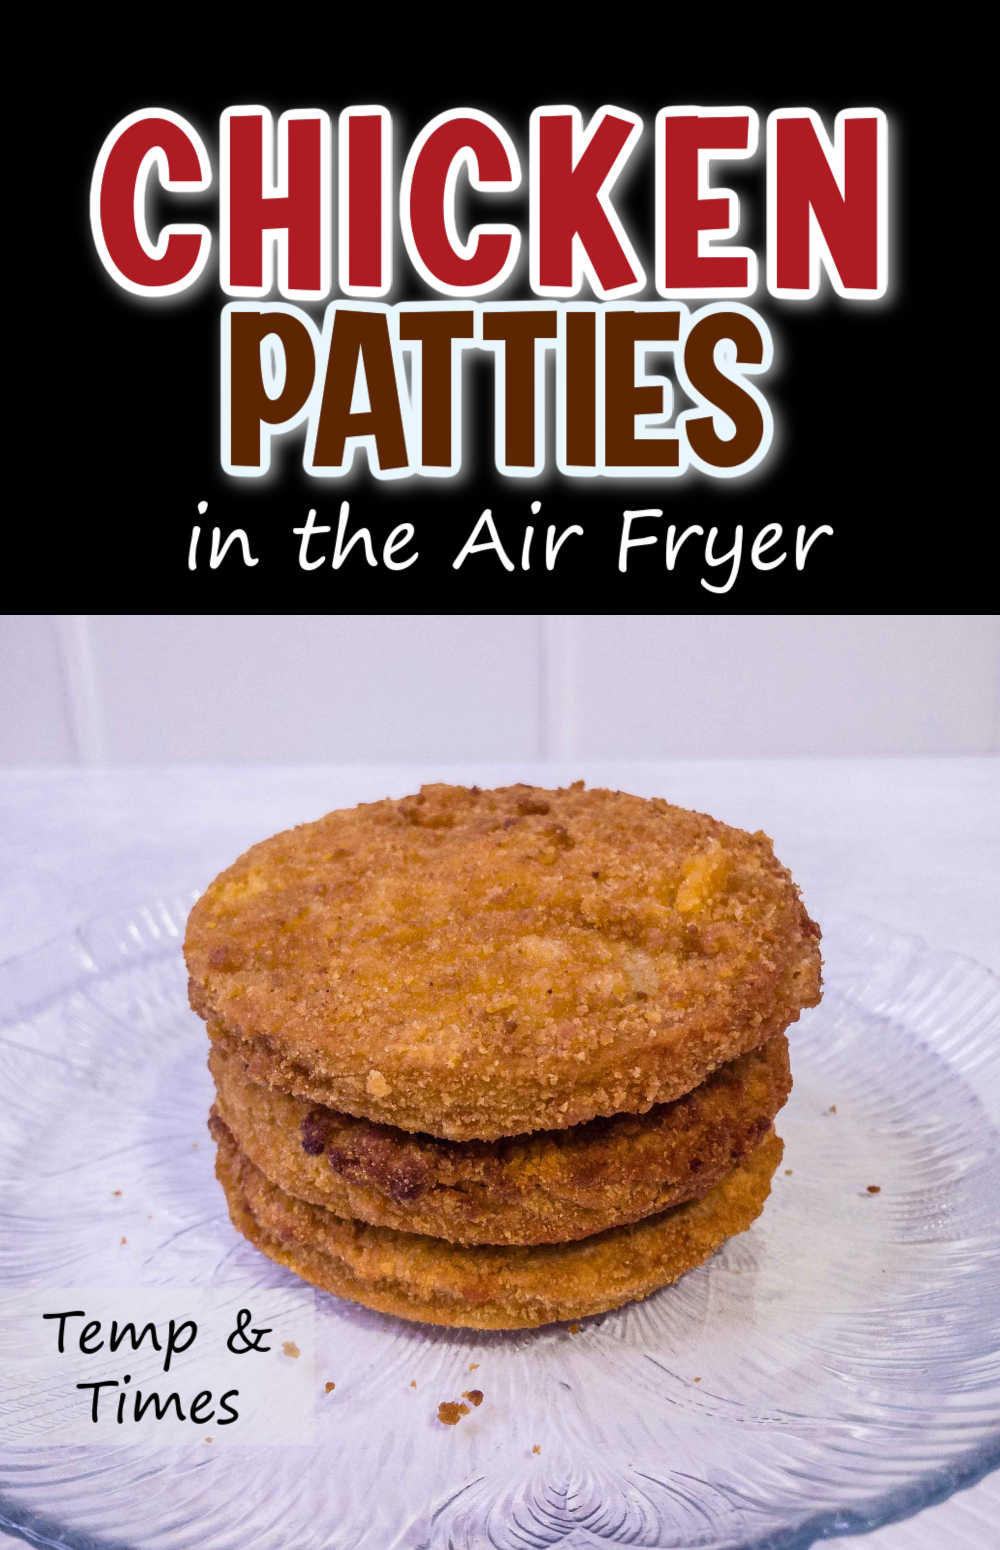 Pin Image: top says "Chicken Patties in the Air Fryer" bottom has a pic with a pile of cooked chicken patties.